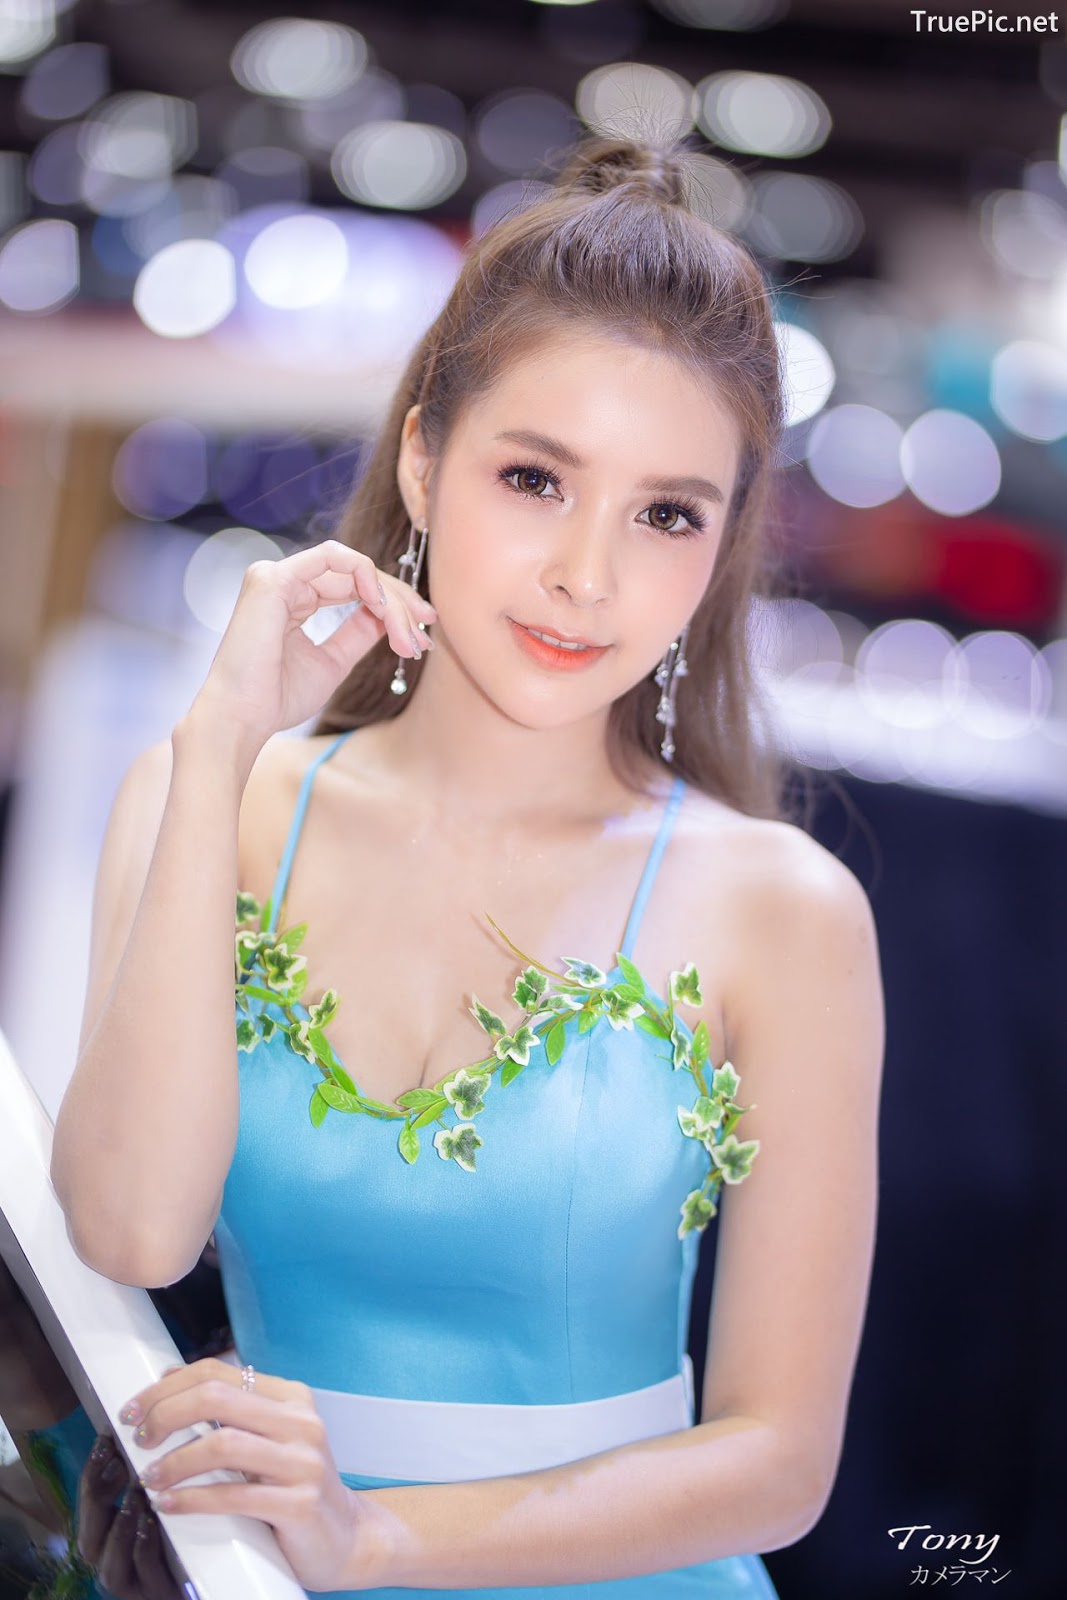 Image-Thailand-Hot-Model-Thai-Racing-Girl-At-Motor-Show-2019-TruePic.net- Picture-23